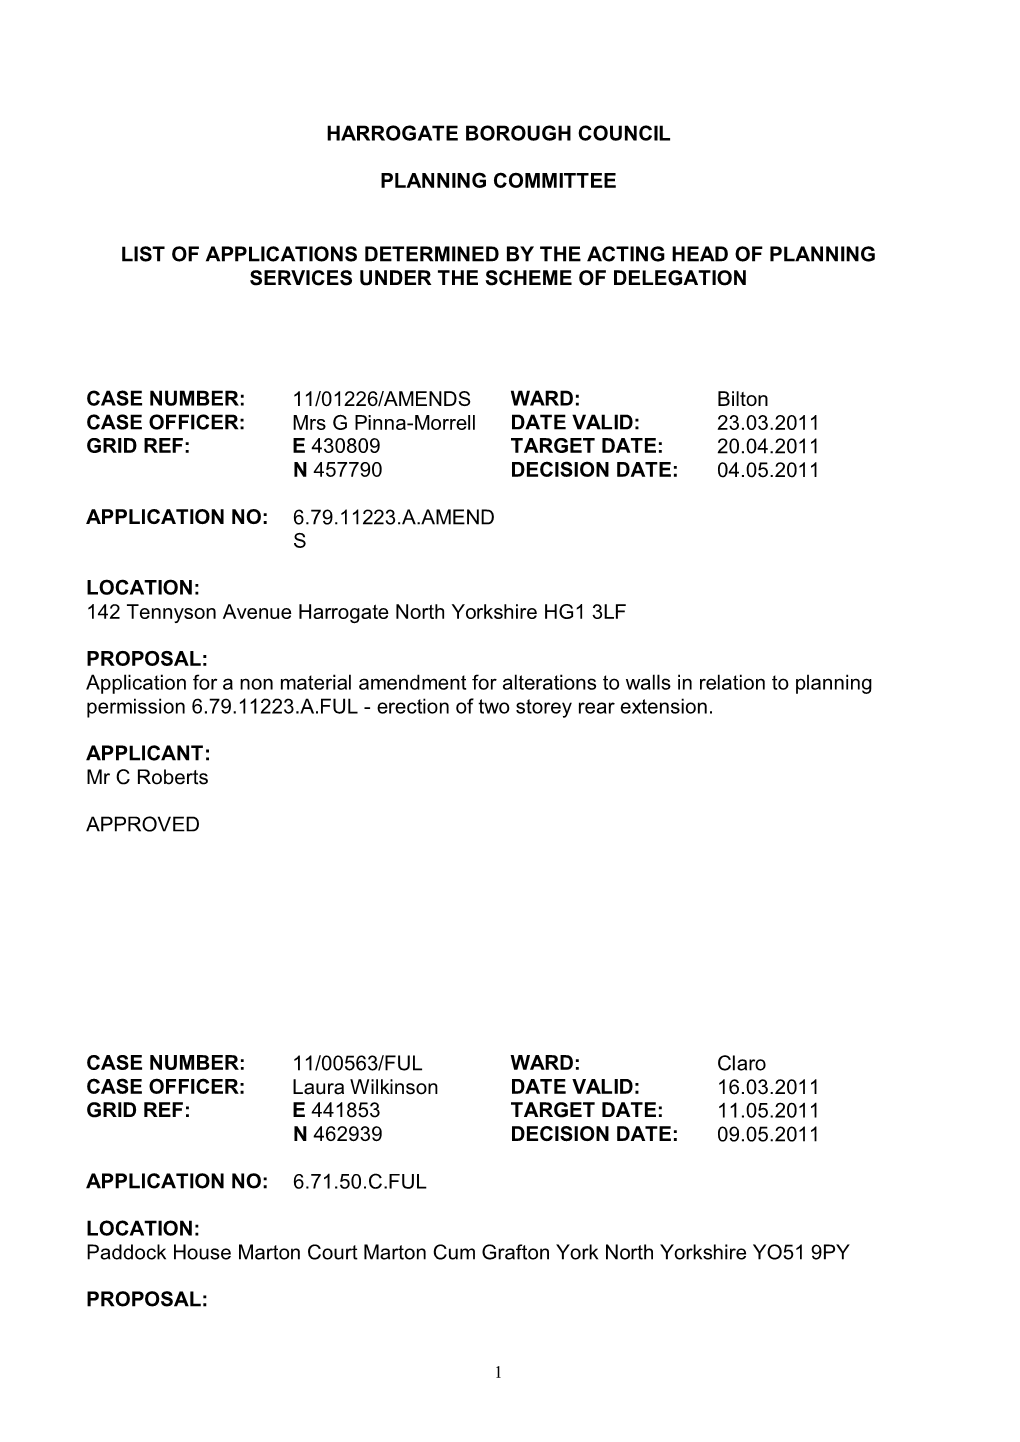 Harrogate Borough Council Planning Committee List of Applications Determined by the Acting Head of Planning Services Under the S